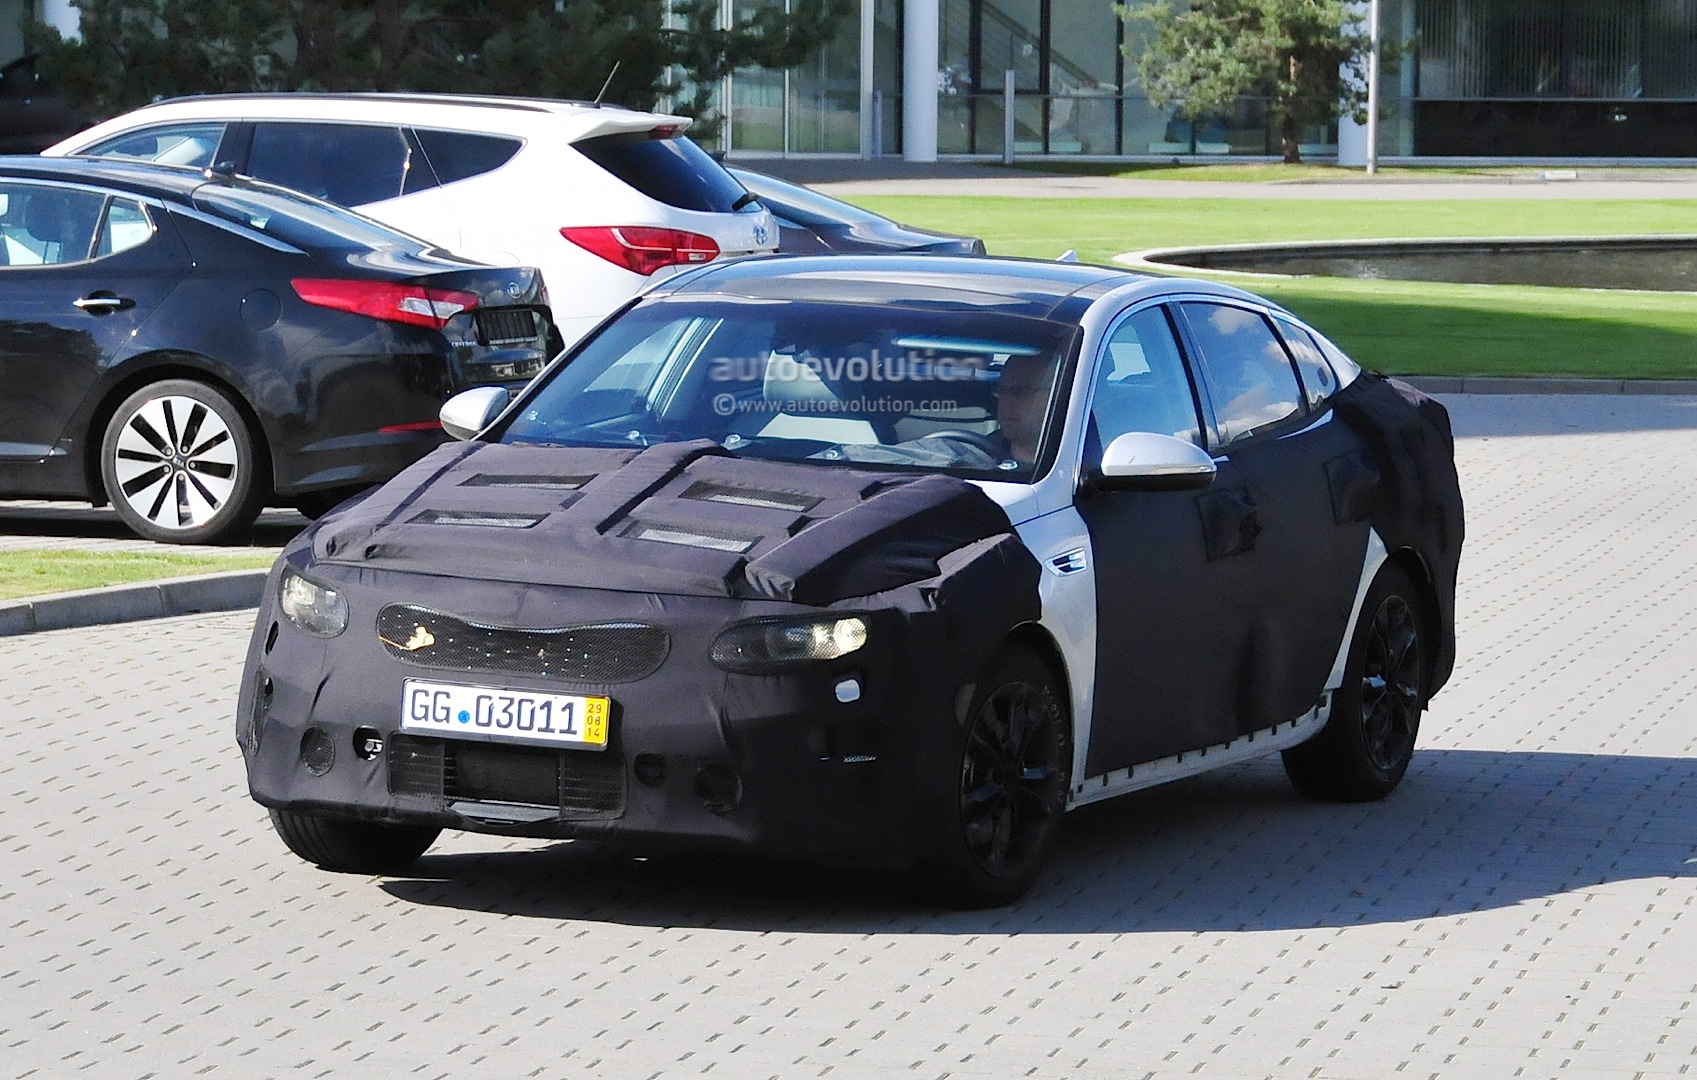 all-new-2016-kia-optima-spied-for-the-first-time-including-the-interior_2